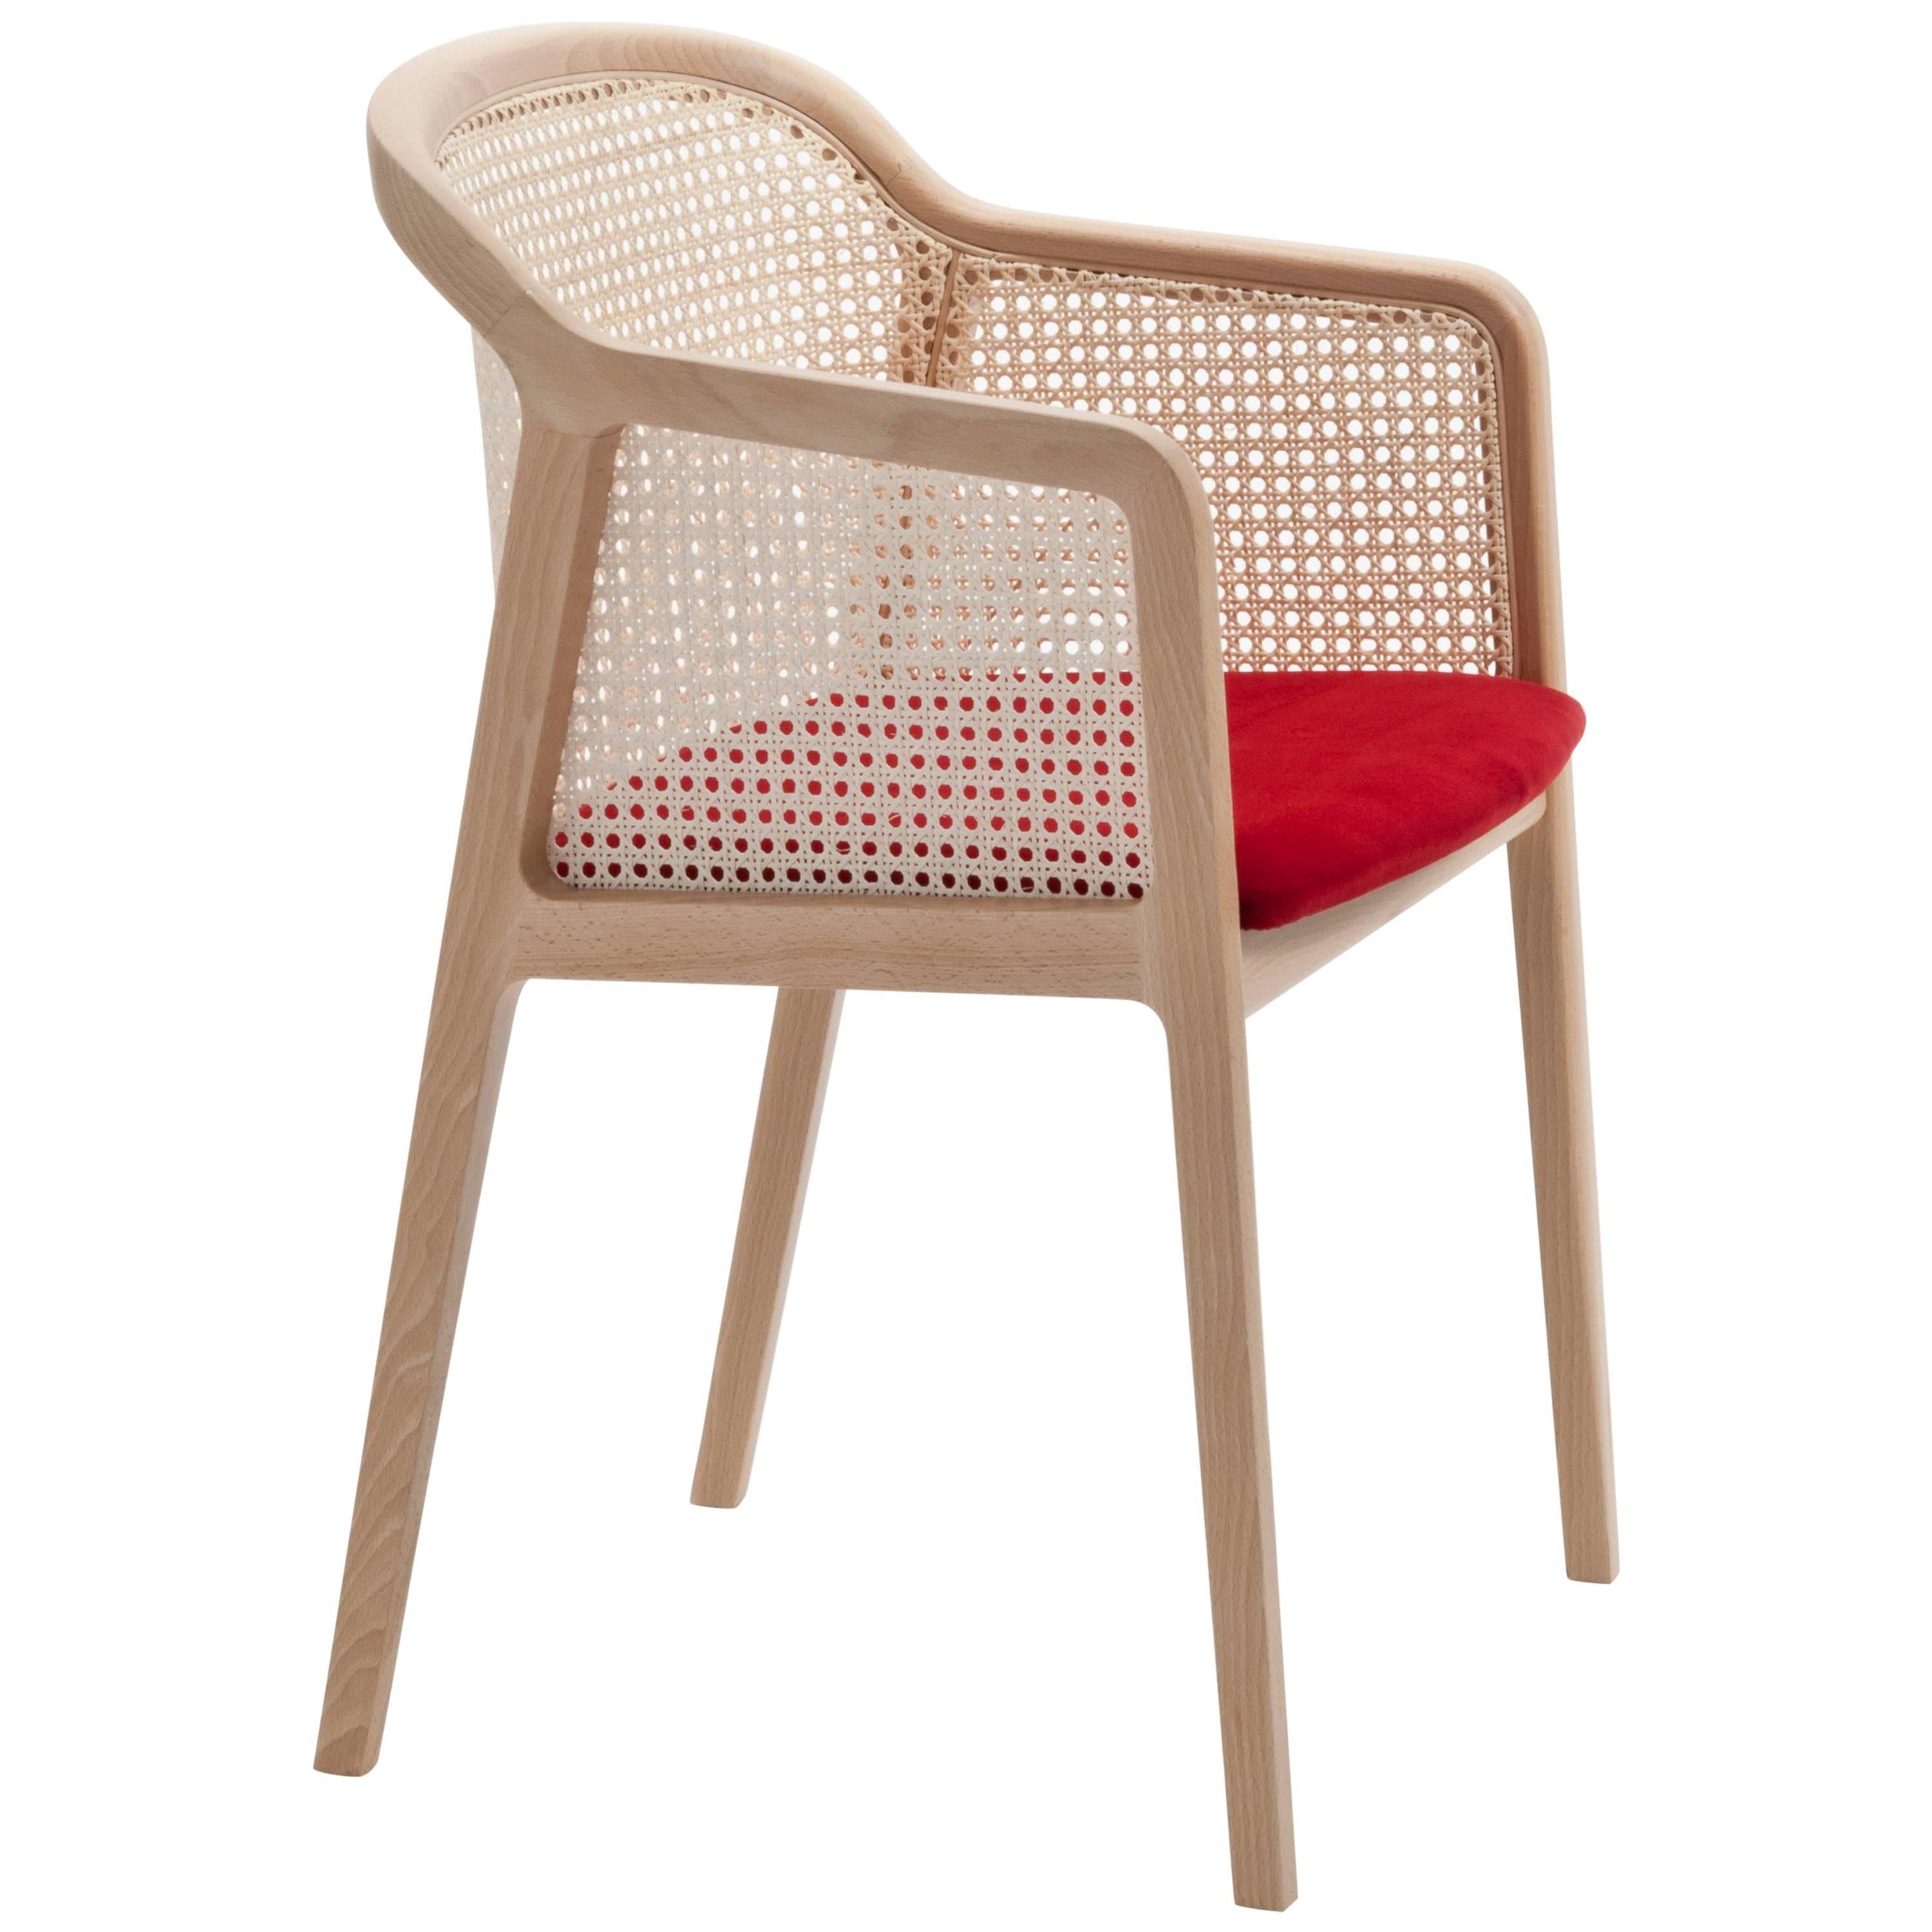 Moderne Vienna Armchair by Colé, Modernity Design in Wood and Straw, Green Upholstered Seat en vente